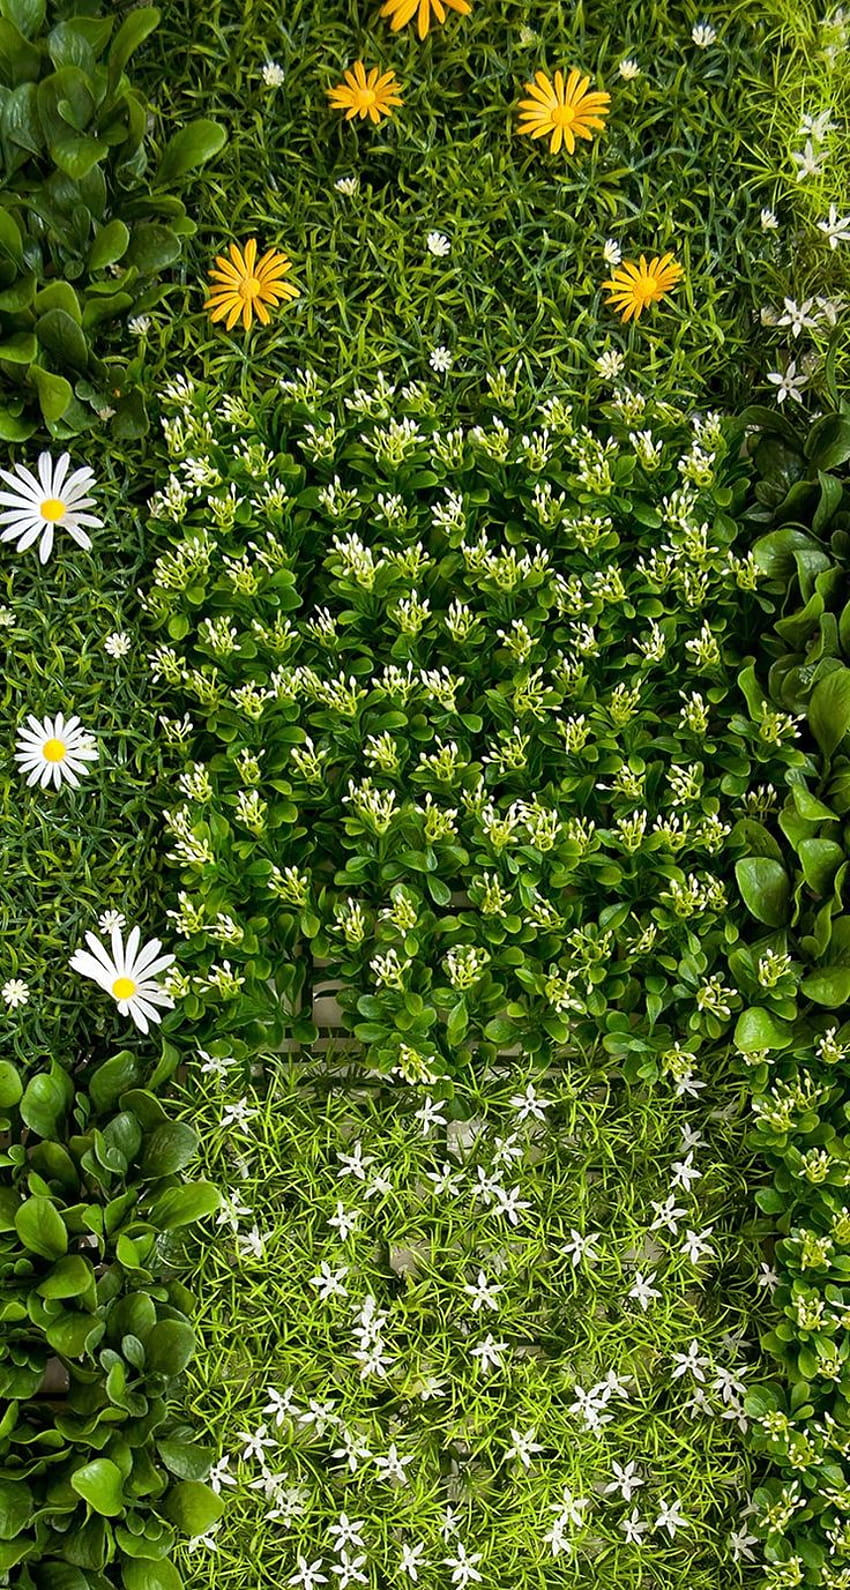 TAP AND GET THE APP! Nature Unicolor Grass Flowers Green Сhamomile iPhone 5 Wallpape…, natural herbs and shrubs HD phone wallpaper